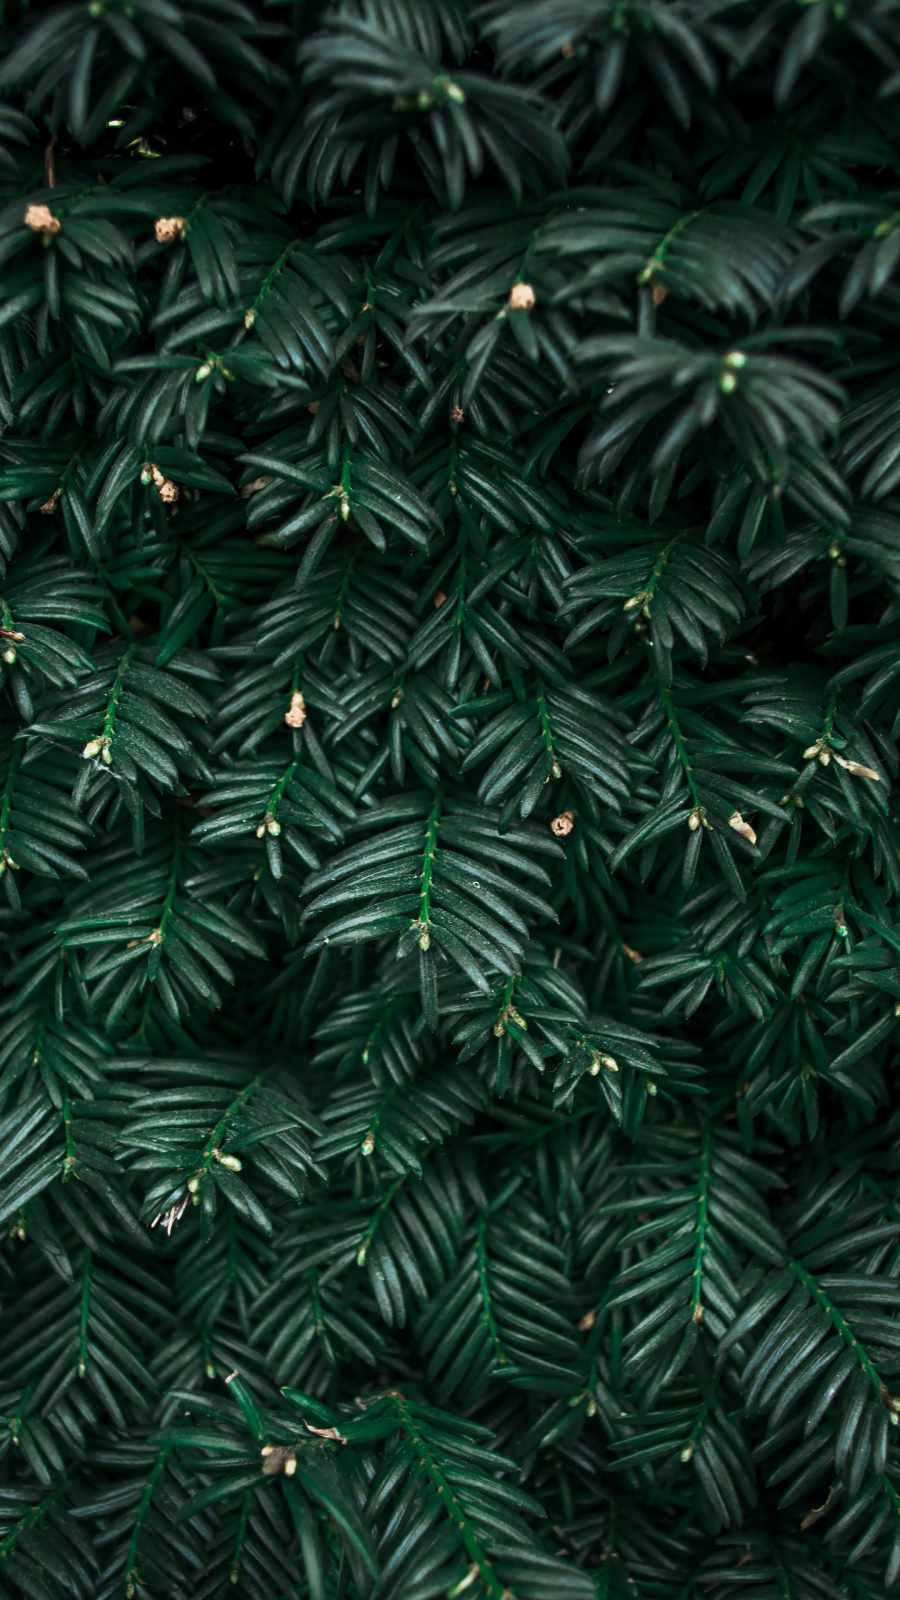 Feel connected to nature with a Plant Iphone Wallpaper